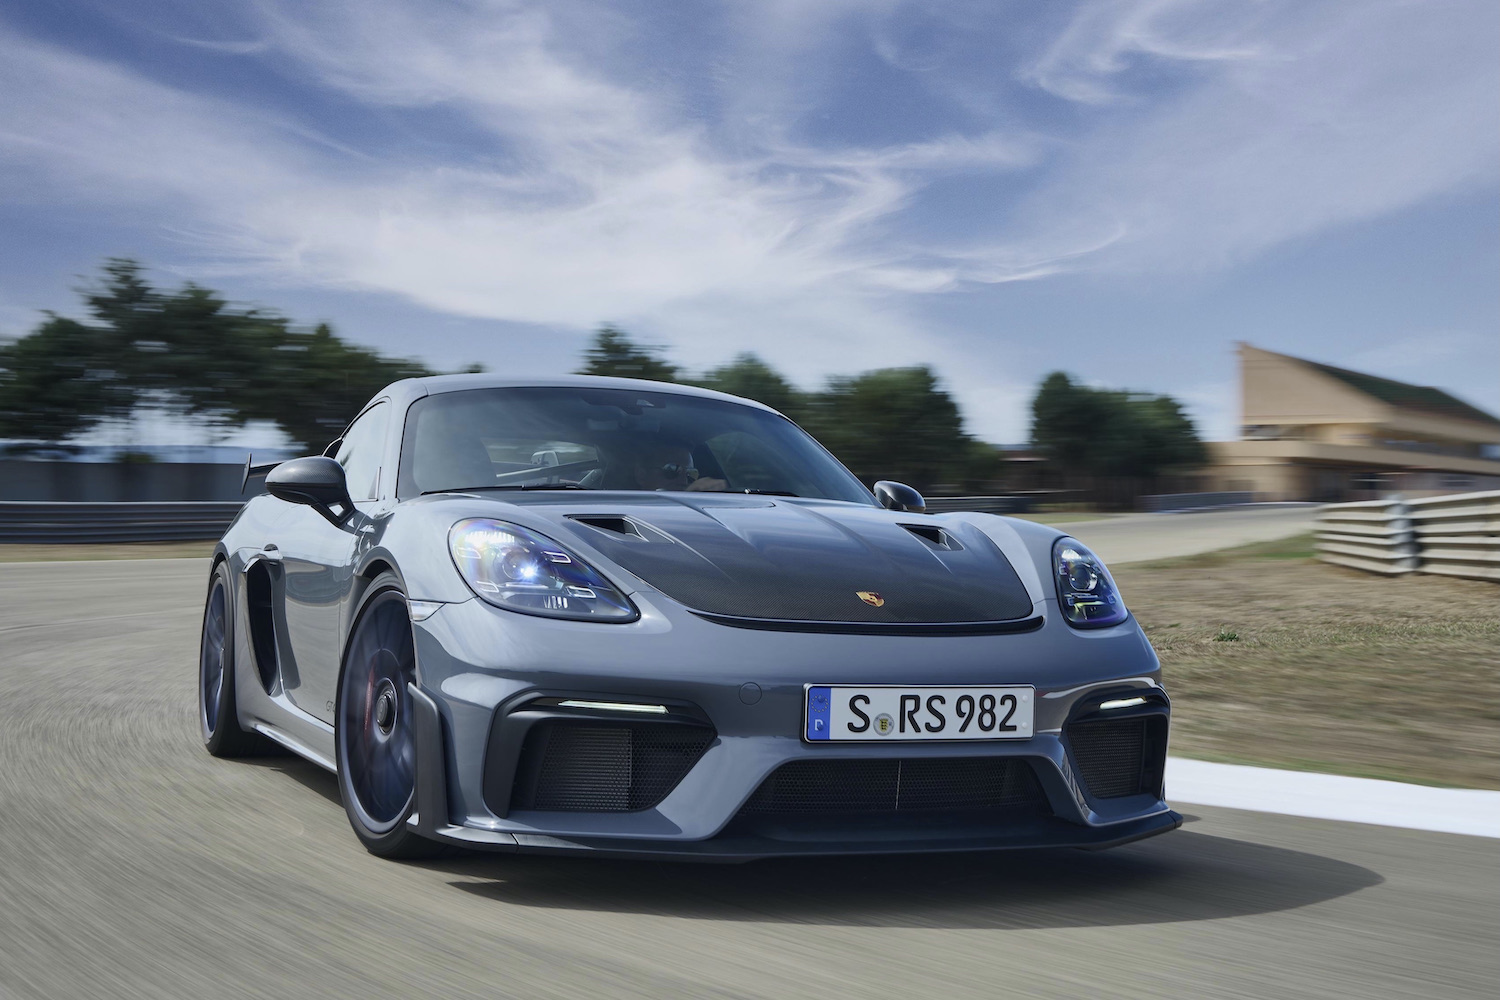 Porsche 718 Cayman GT4 RS front end close up from passenger side on track.